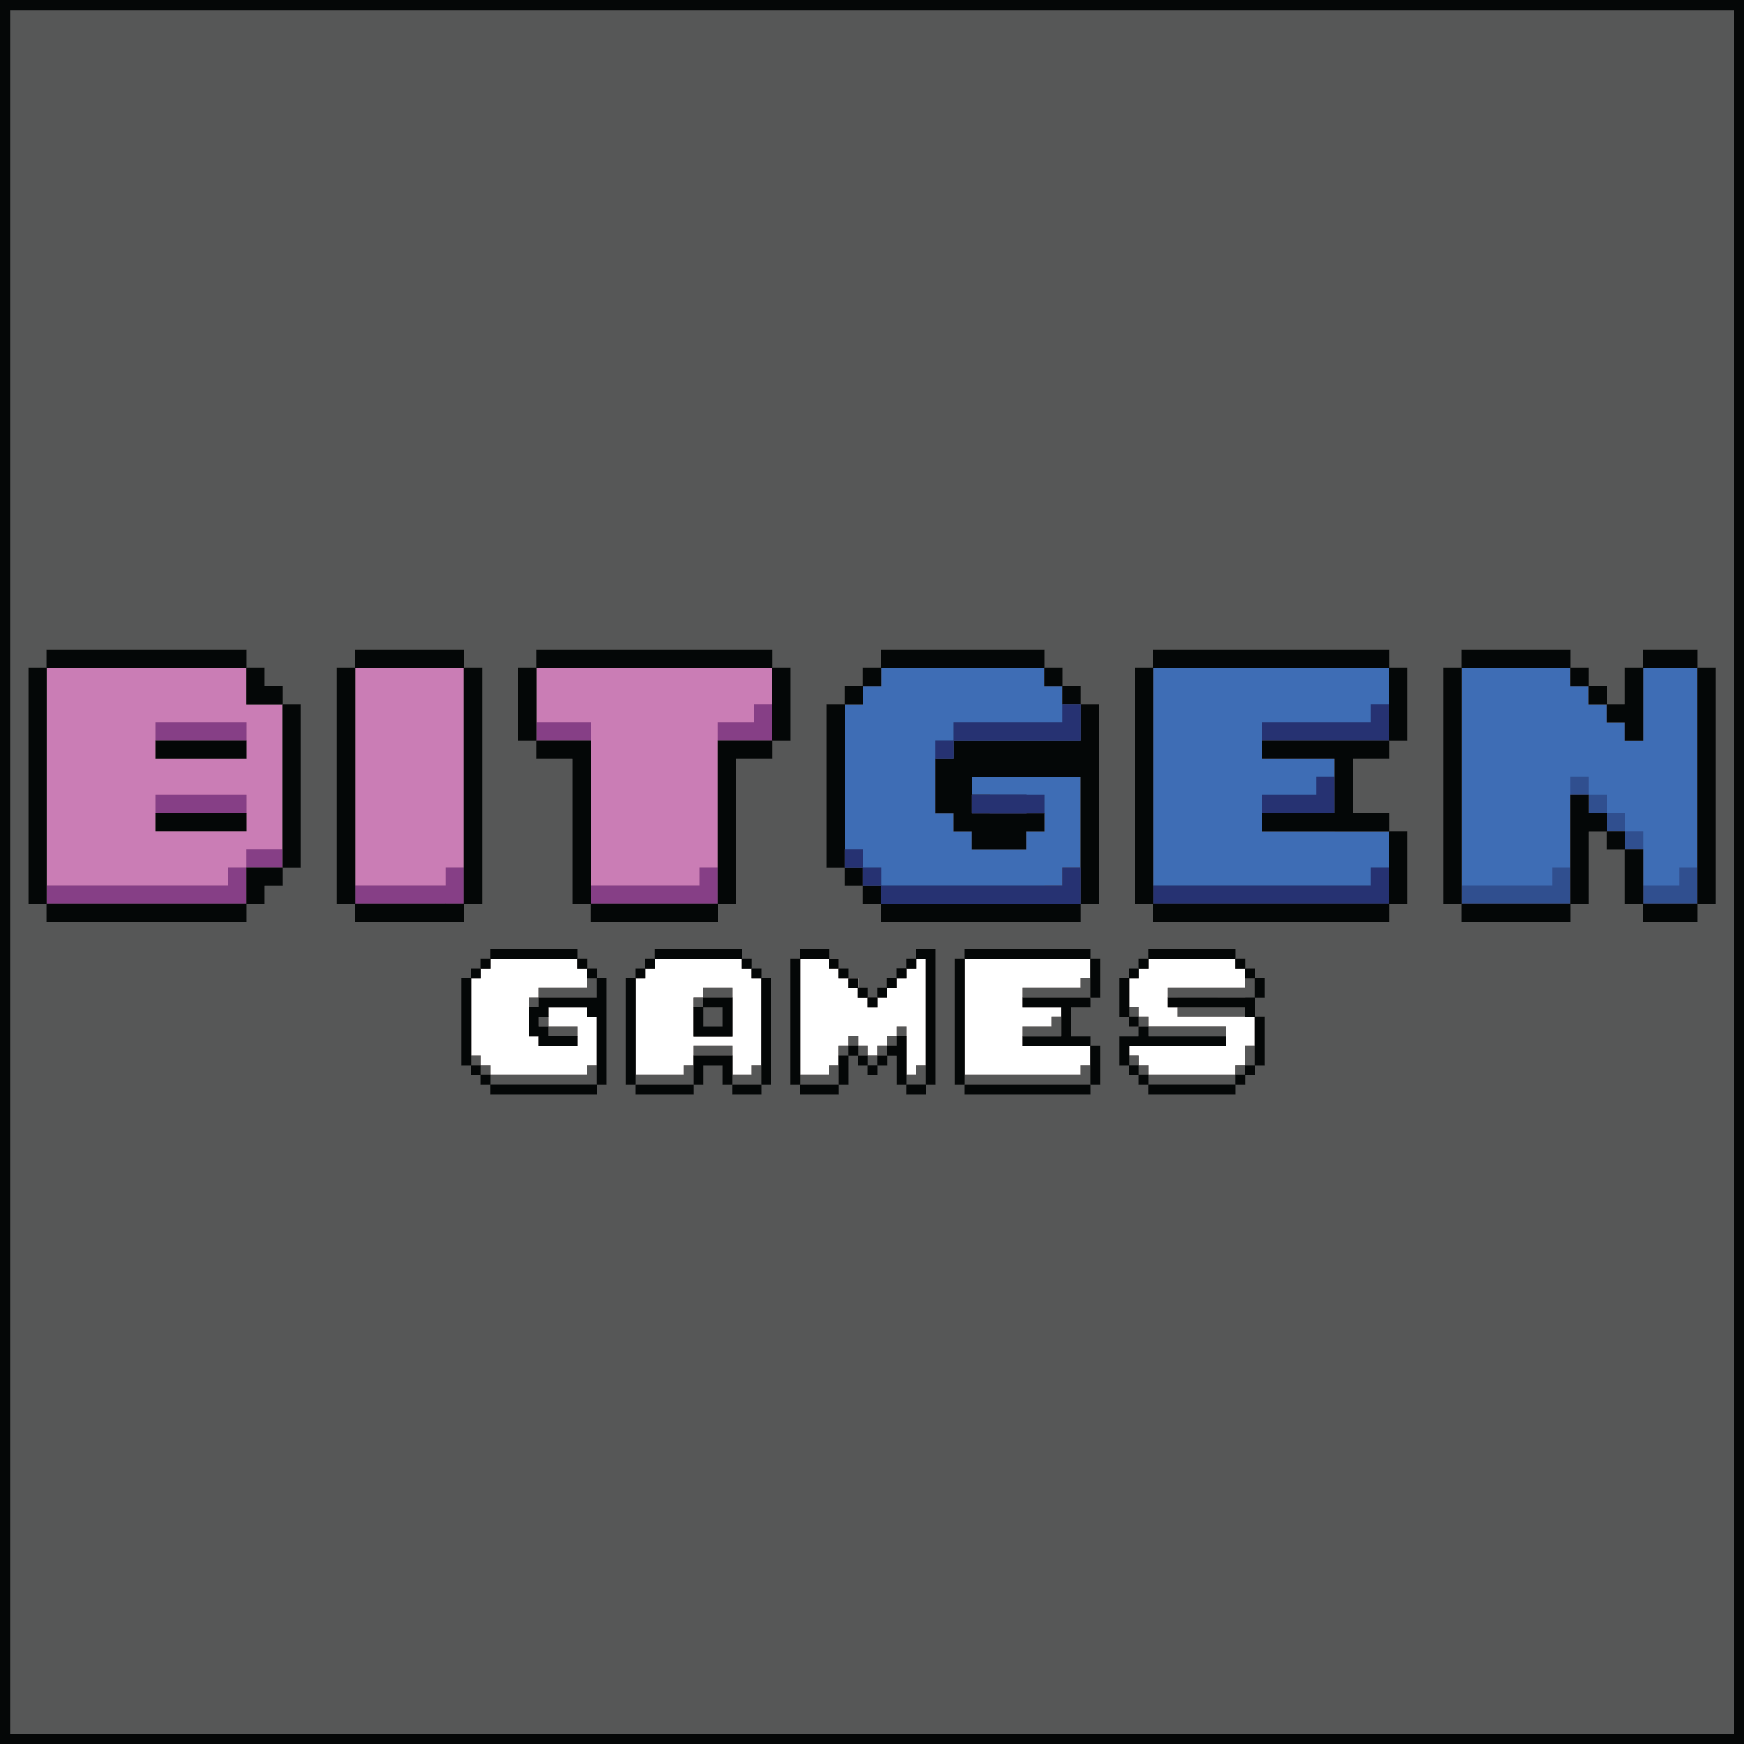 Founded in 2022 Bit Gen Games first got started developing their own NES games using NESmaker, the name BIT GEN GAMES is spawned from a one day yearly videogame festival in Baltimore in the summer called BIT GEN GAMERS FEST which features some of the best videogame themed musicians in the world. The BIT GEN GAMES team is composed of Mark Homayouni aka DJ Super Sonic; the main programmer, game designer, and sound engineer(chiptune), and John de Campos aka Ghostbat; the cover artist. Two official games have been released thus far in the span of BIT GEN GAMES lifetime, Dragon Master (a sides scrolling action platformer) where the goal is to rescue Princess Zorldo by using kung fu skills and defeating the evil dragons Dankey and Kang. BIT GEN GAMES second official release was Nosferatu's Revenge (side scrolling action platformer on Gameboy Color released in January of 2023). BIT GEN GAMES is currently developing its third game Fight City which is planned to be a two player action packed game with plenty of edginess commonly seen in classic beat em ups of the past. Come playtest some of our official released games and some games currently in development at Gotto Go Fest this year, and also maybe consider purchasing a game or two to support BIT GEN GAMES growth in the future of the videogame industry.